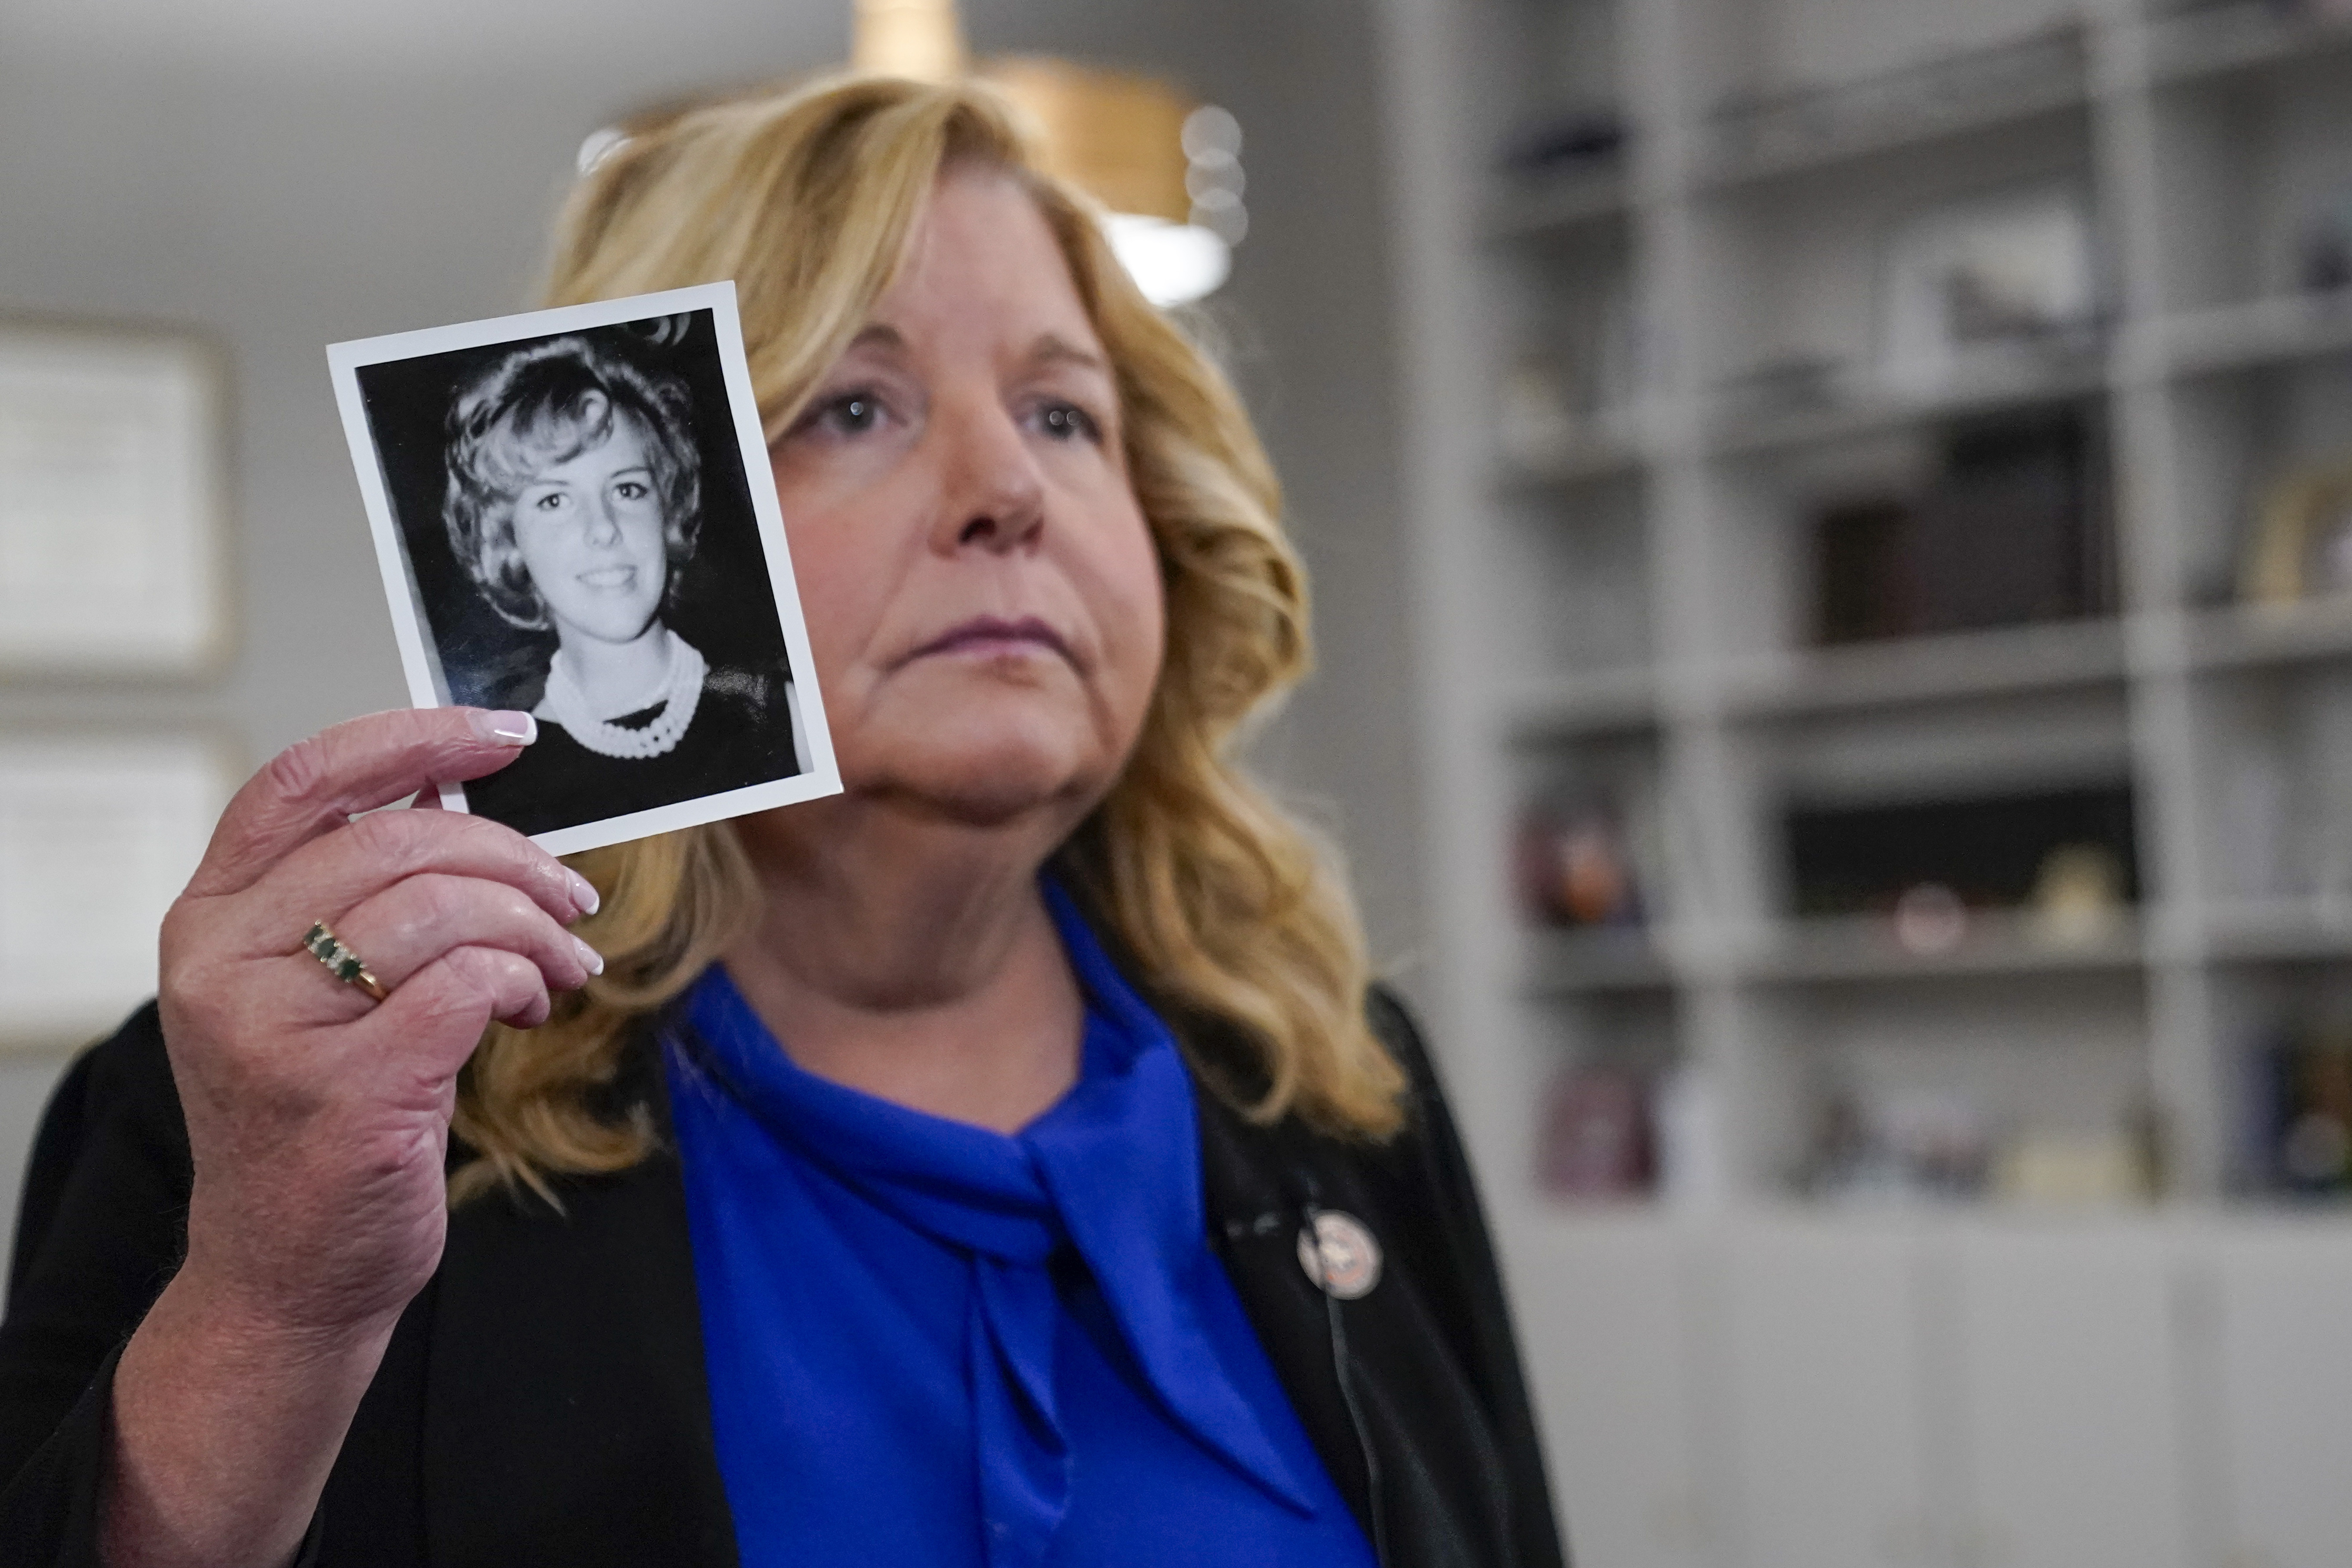 assau County District Attorney Anne Donnelly holds a photo of Diane Cusick during an interview with The Associated Press, Wednesday, June 22, 2022, in Mineola, N.Y. More than 50 years after a woman was found dead in her car at a mall on Long Island, authorities prosecutors are expected to announce that DNA evidence has linked the slaying to Richard Cottingham, a serial killer who has been connected to 11 murders in New York and New Jersey between 1965 and 1980. (AP Photo/Mary Altaffer)